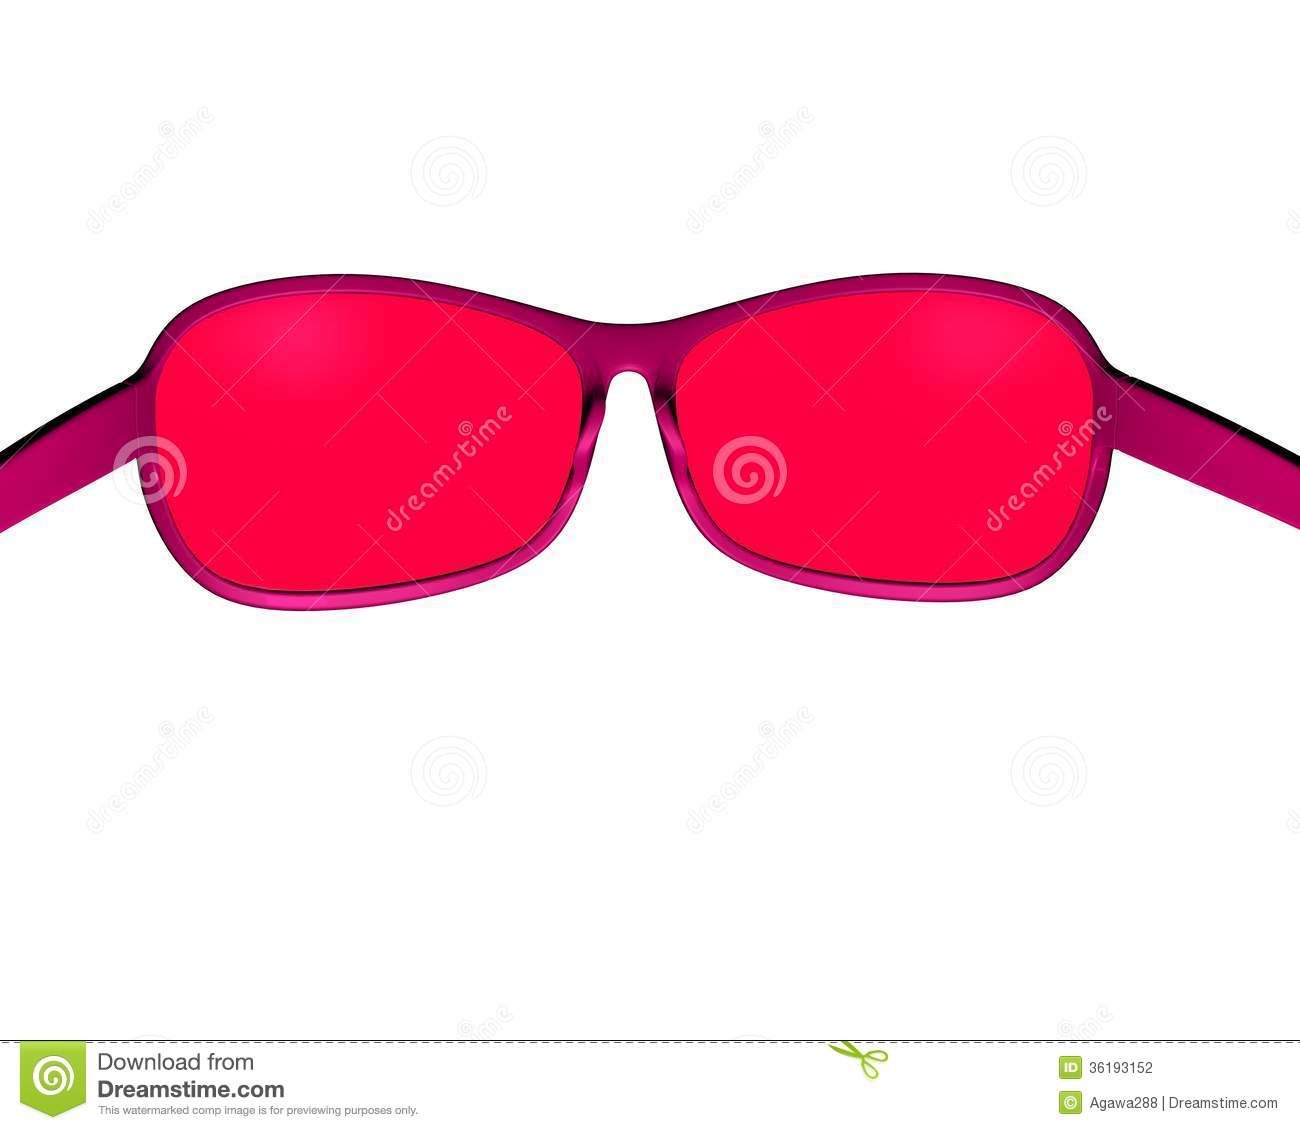 Optimism Positive Thinking Concept Illustration With Pink Sunglasses